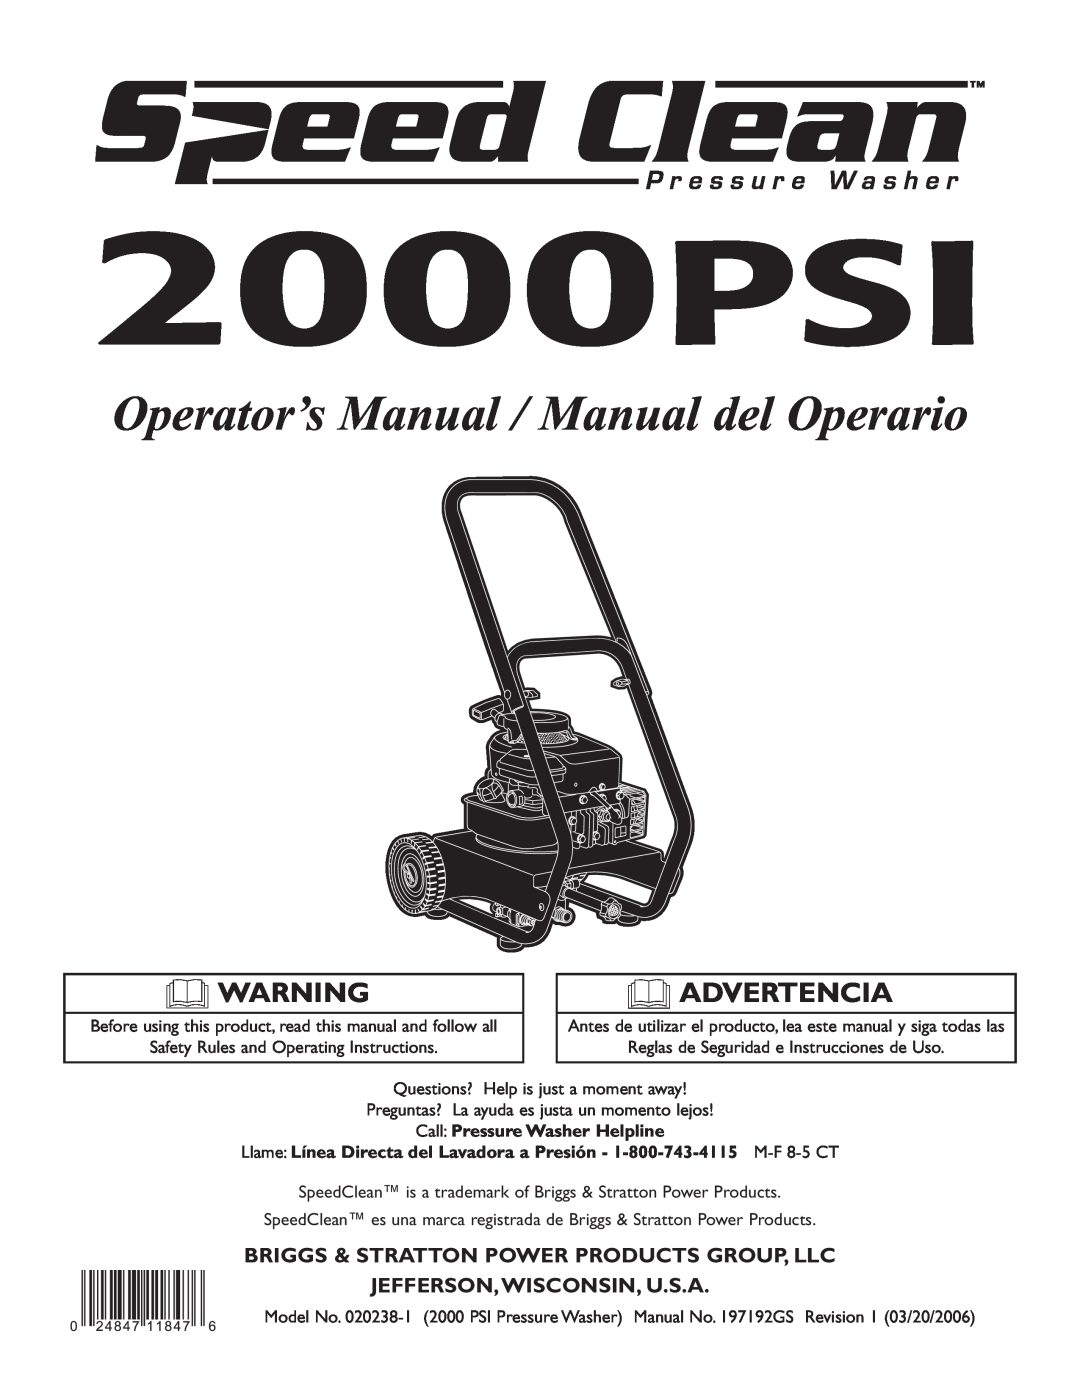 Briggs & Stratton 020238-0 operating instructions Briggs & Stratton Power Products Group, Llc, Jefferson,Wisconsin, U.S.A 